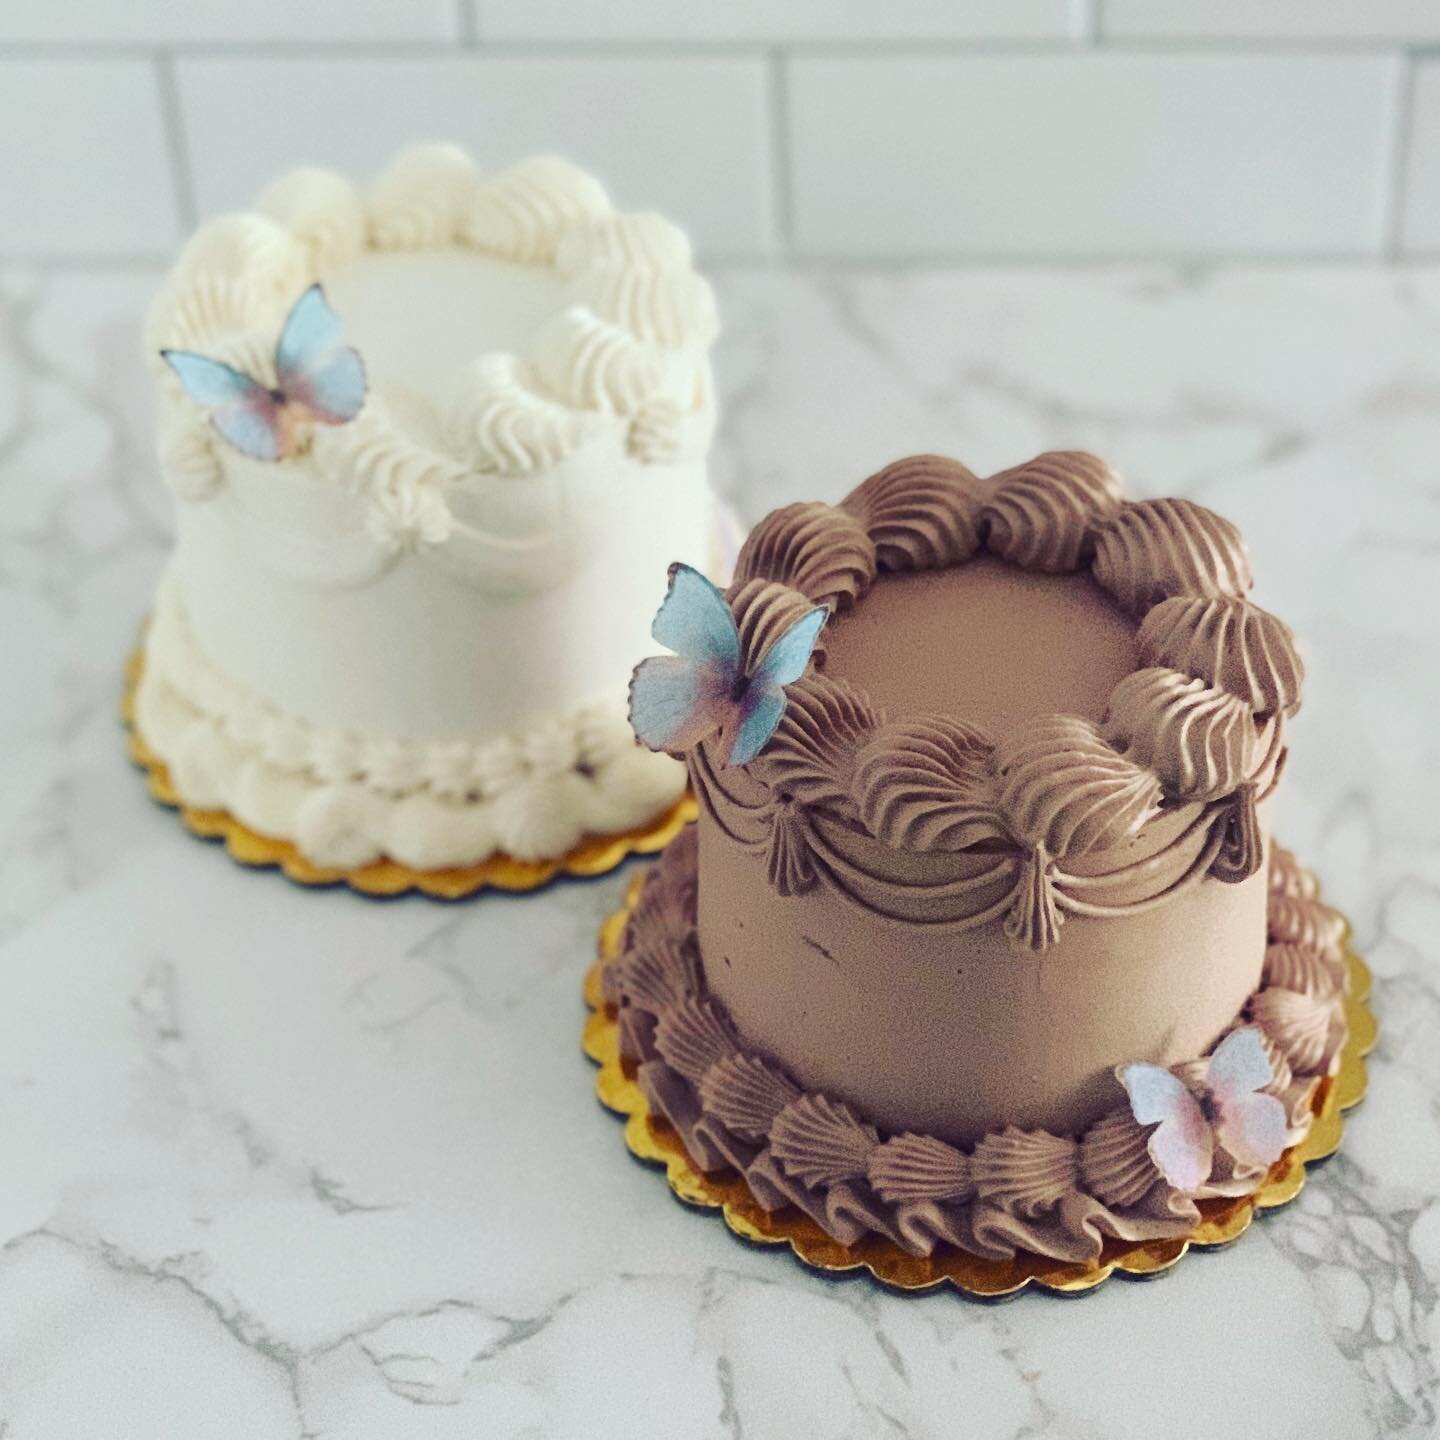 Mother&rsquo;s Day mini cakes are available for preorder! And they&rsquo;re pretty cute if I do say so myself 🦋

Flavor choices:
Lemon poppyseed cake, lemon curd, vanilla buttercream
Chocolate cake, salted dark chocolate ganache, chocolate buttercre